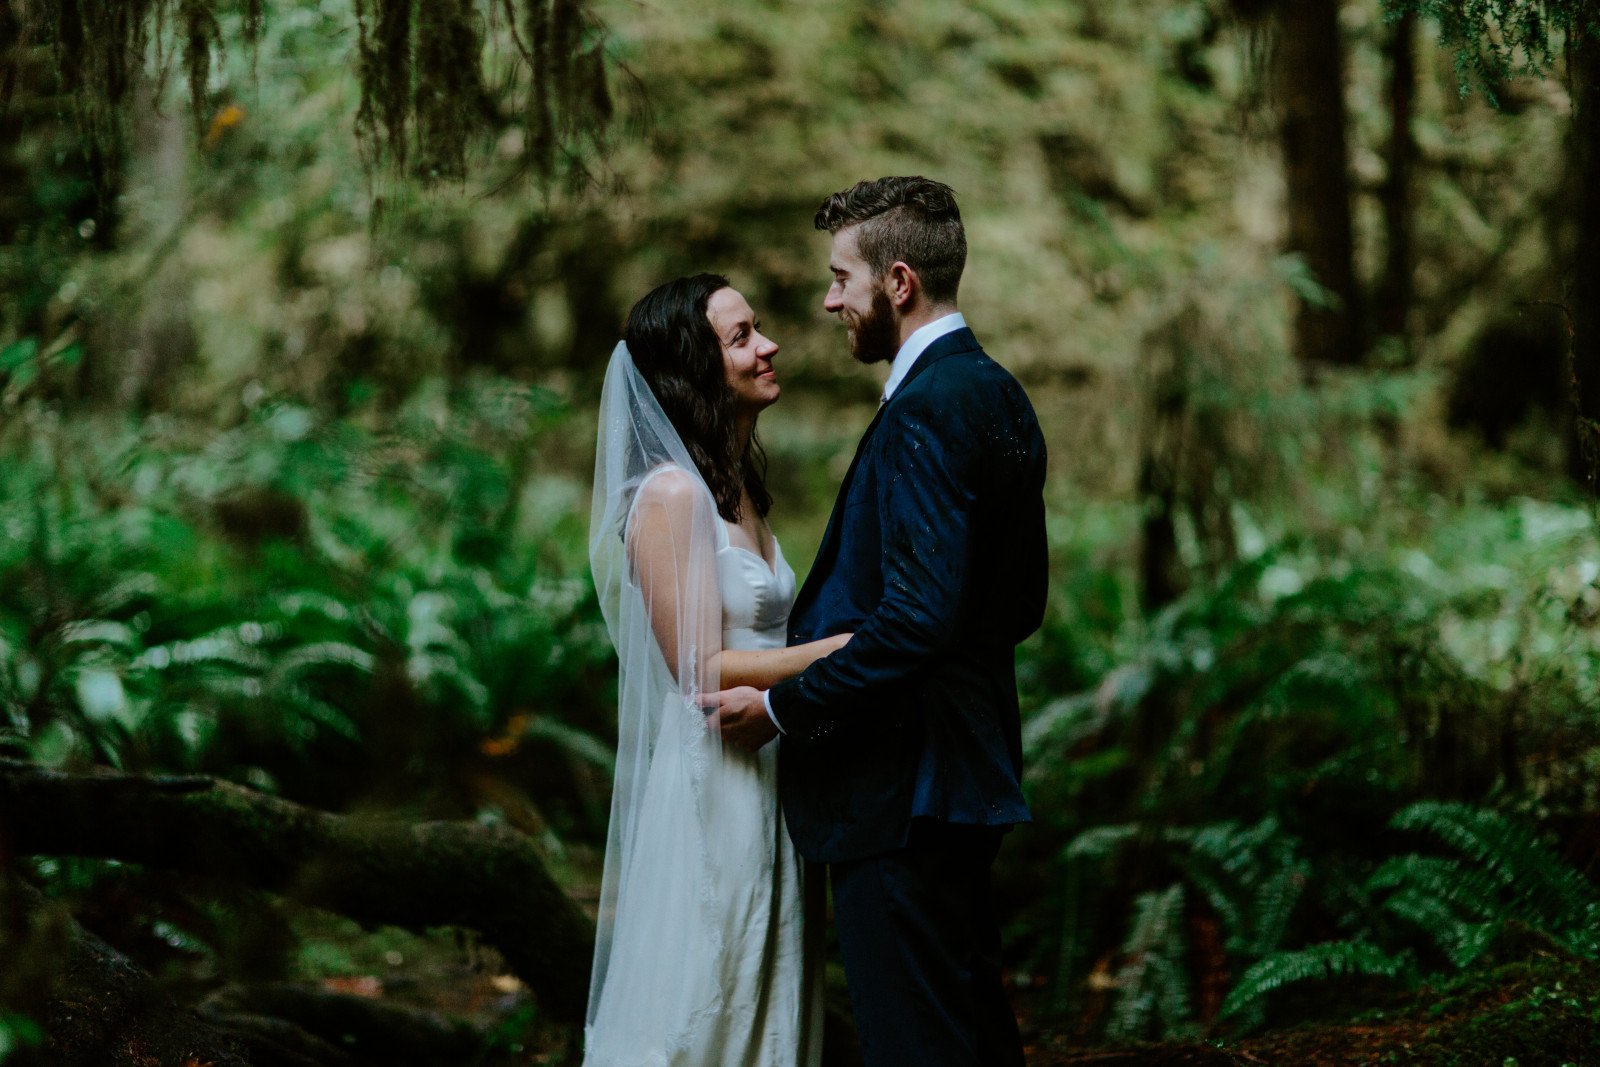 Mollie and Corey smile. Elopement photography in the Olympic National Park by Sienna Plus Josh.